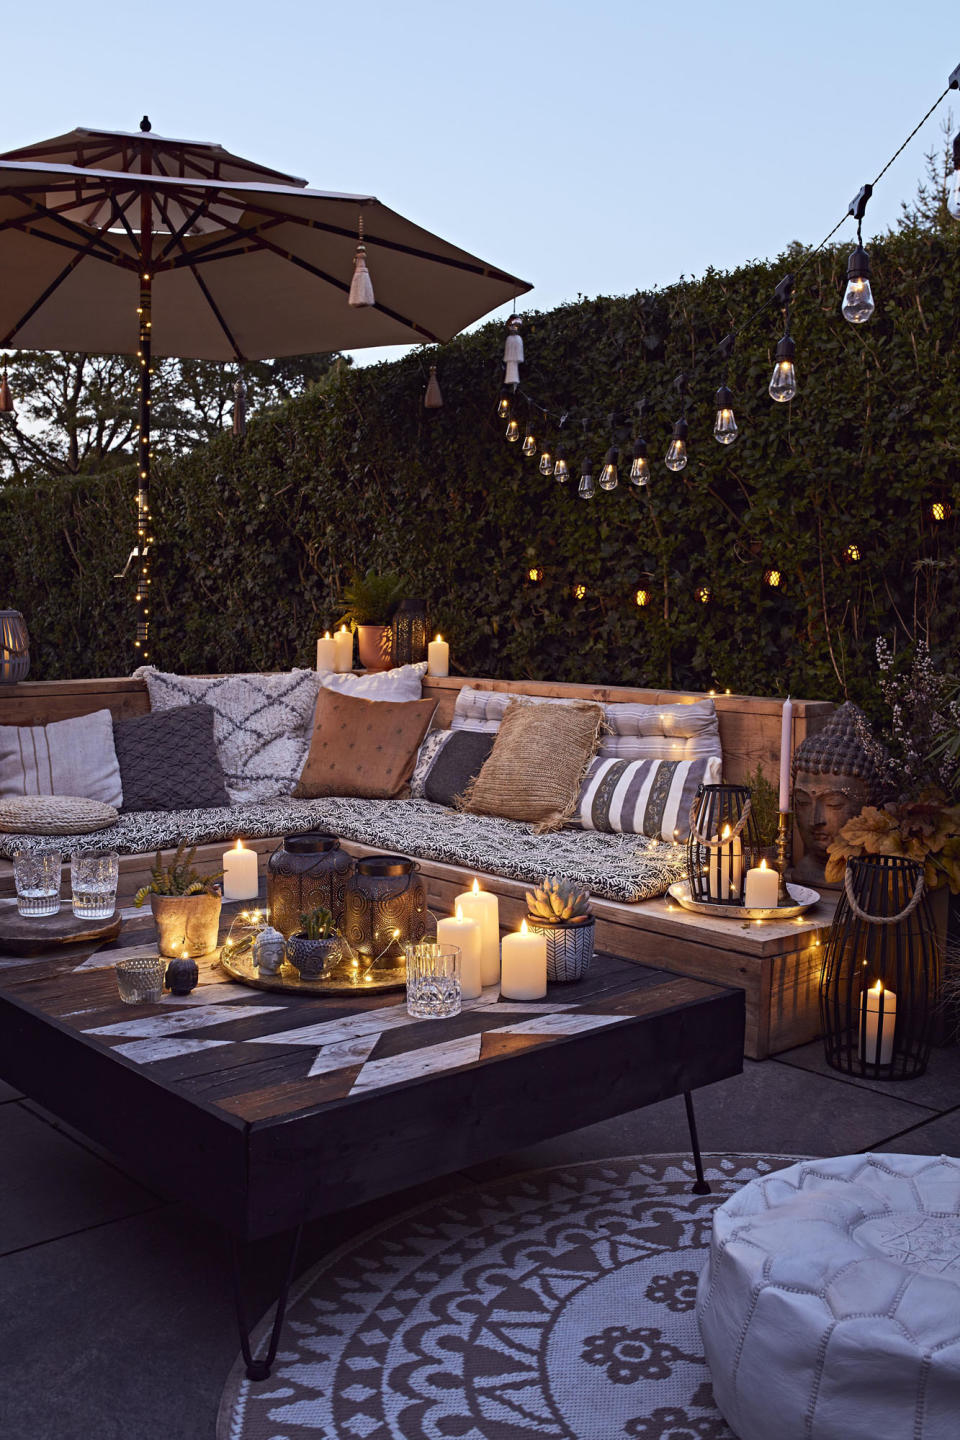 Create inviting corners with garden lighting and comfy cushions